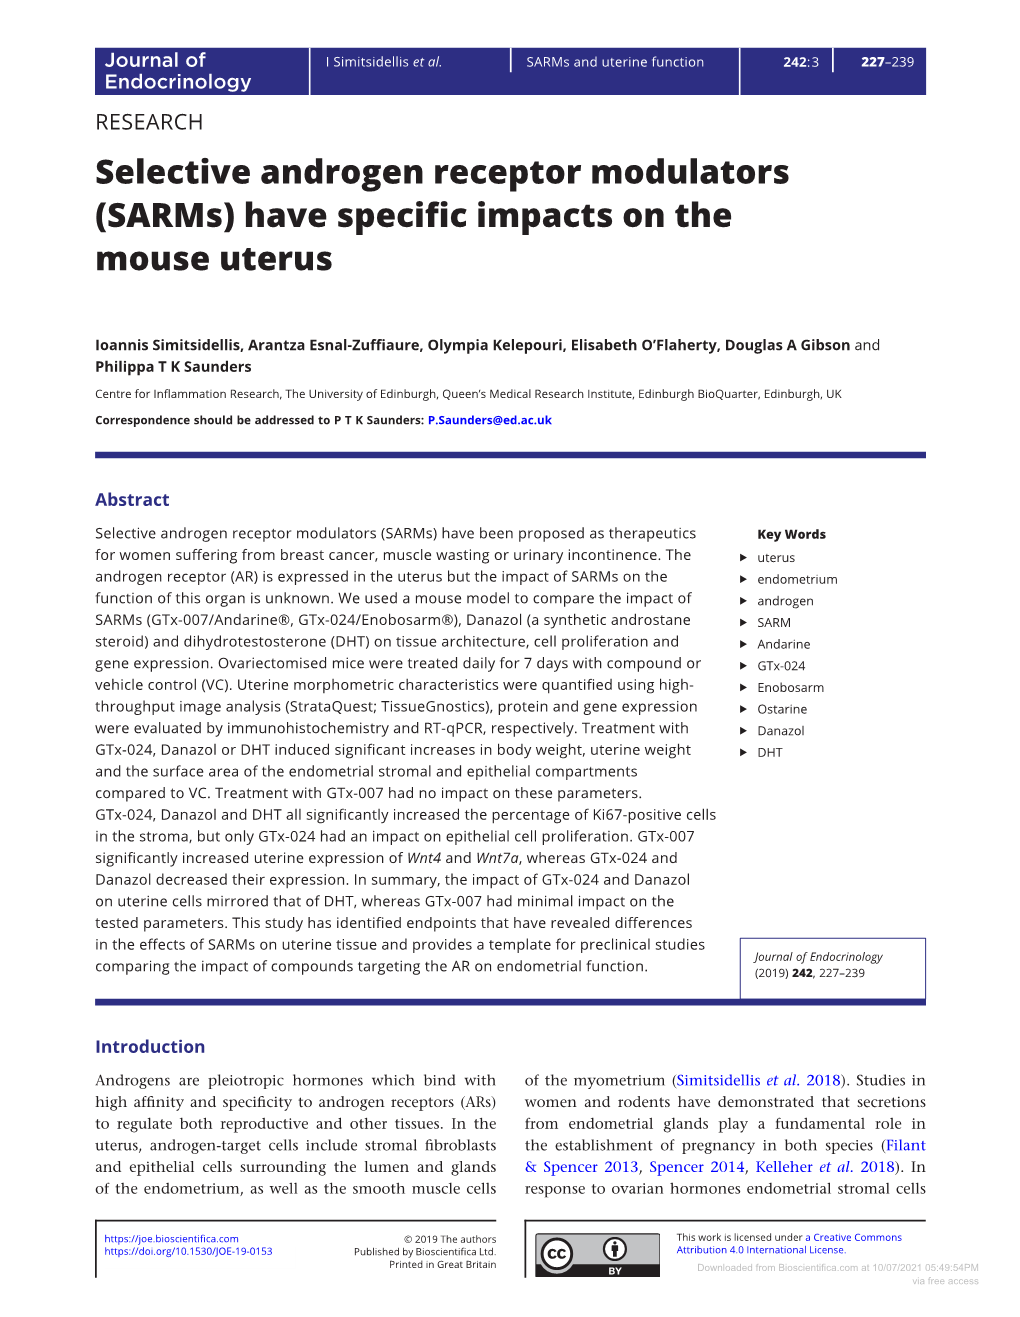 Sarms and Uterine Function 242:3 227–239 Endocrinology RESEARCH Selective Androgen Receptor Modulators (Sarms) Have Specific Impacts on the Mouse Uterus